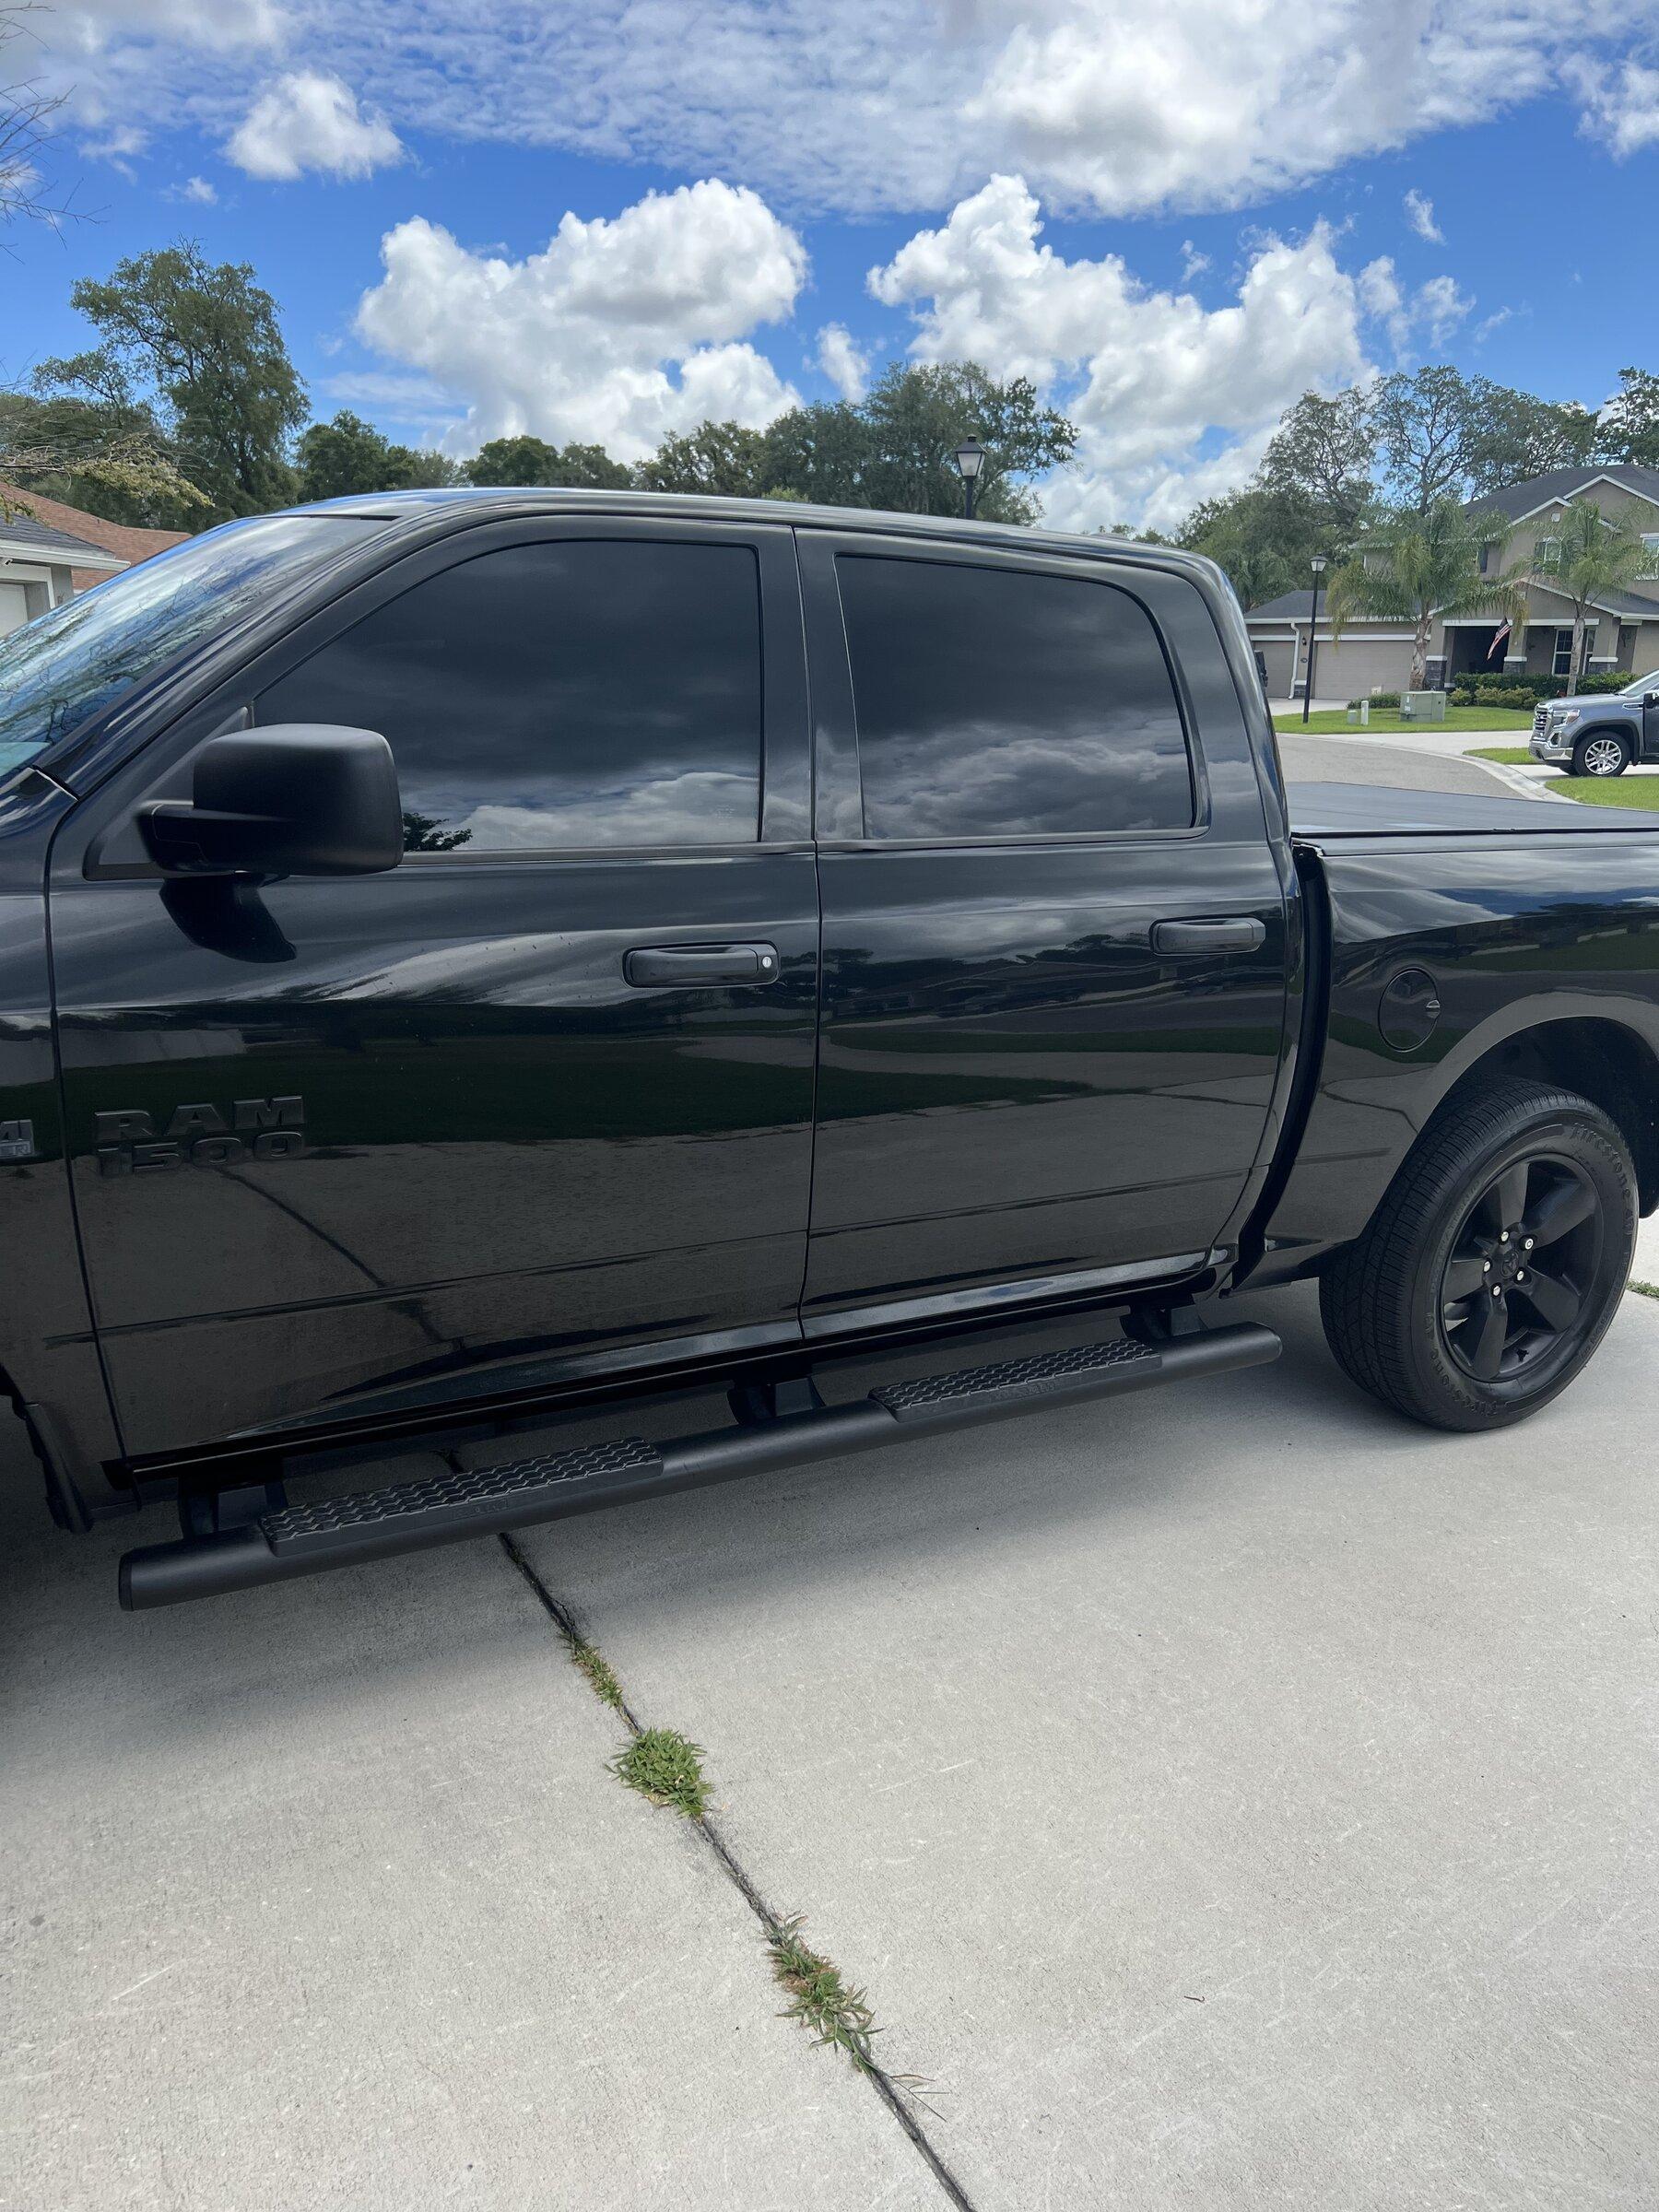 Ford F-150 Lightning How dark is too dark for window tint? DD2D73A8-E952-49D6-90D4-32AED57E3C92